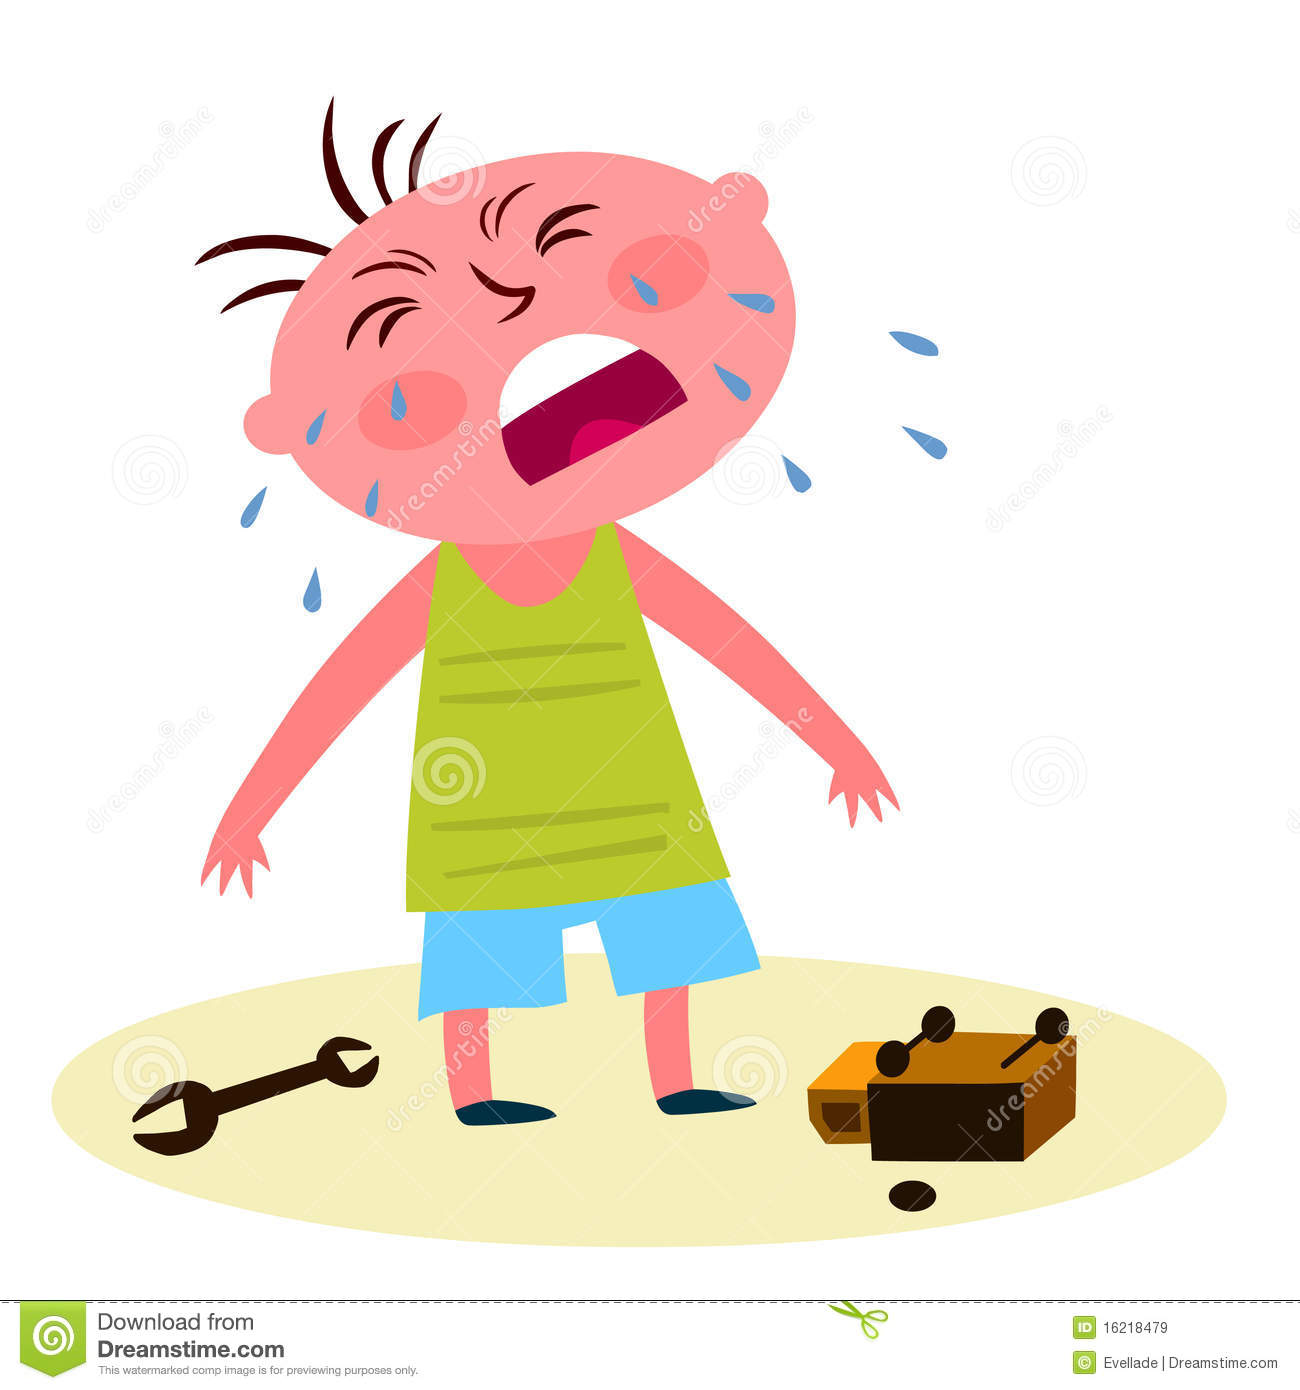 Illustration Of Little Boy Crying Over A Broken Toy